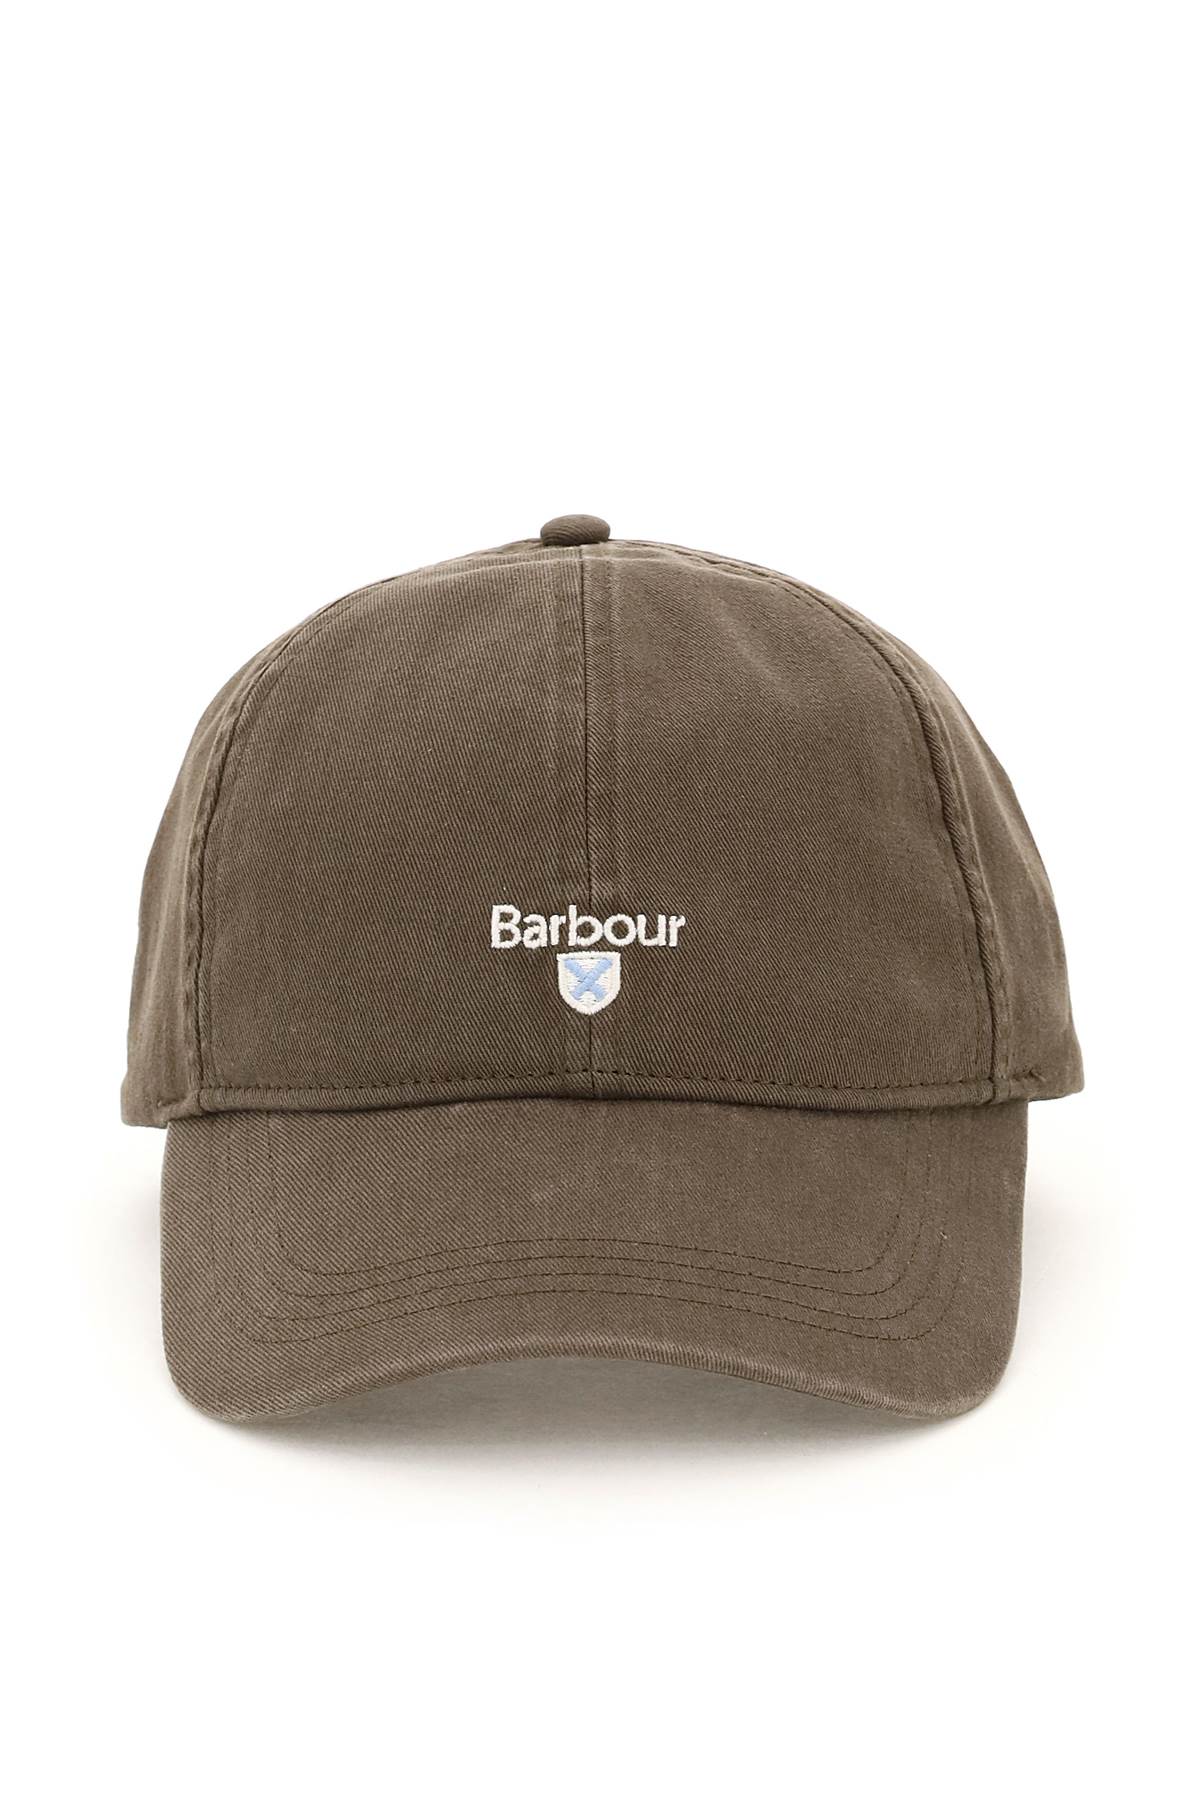 Barbour Cascade Baseball Cap In Olive